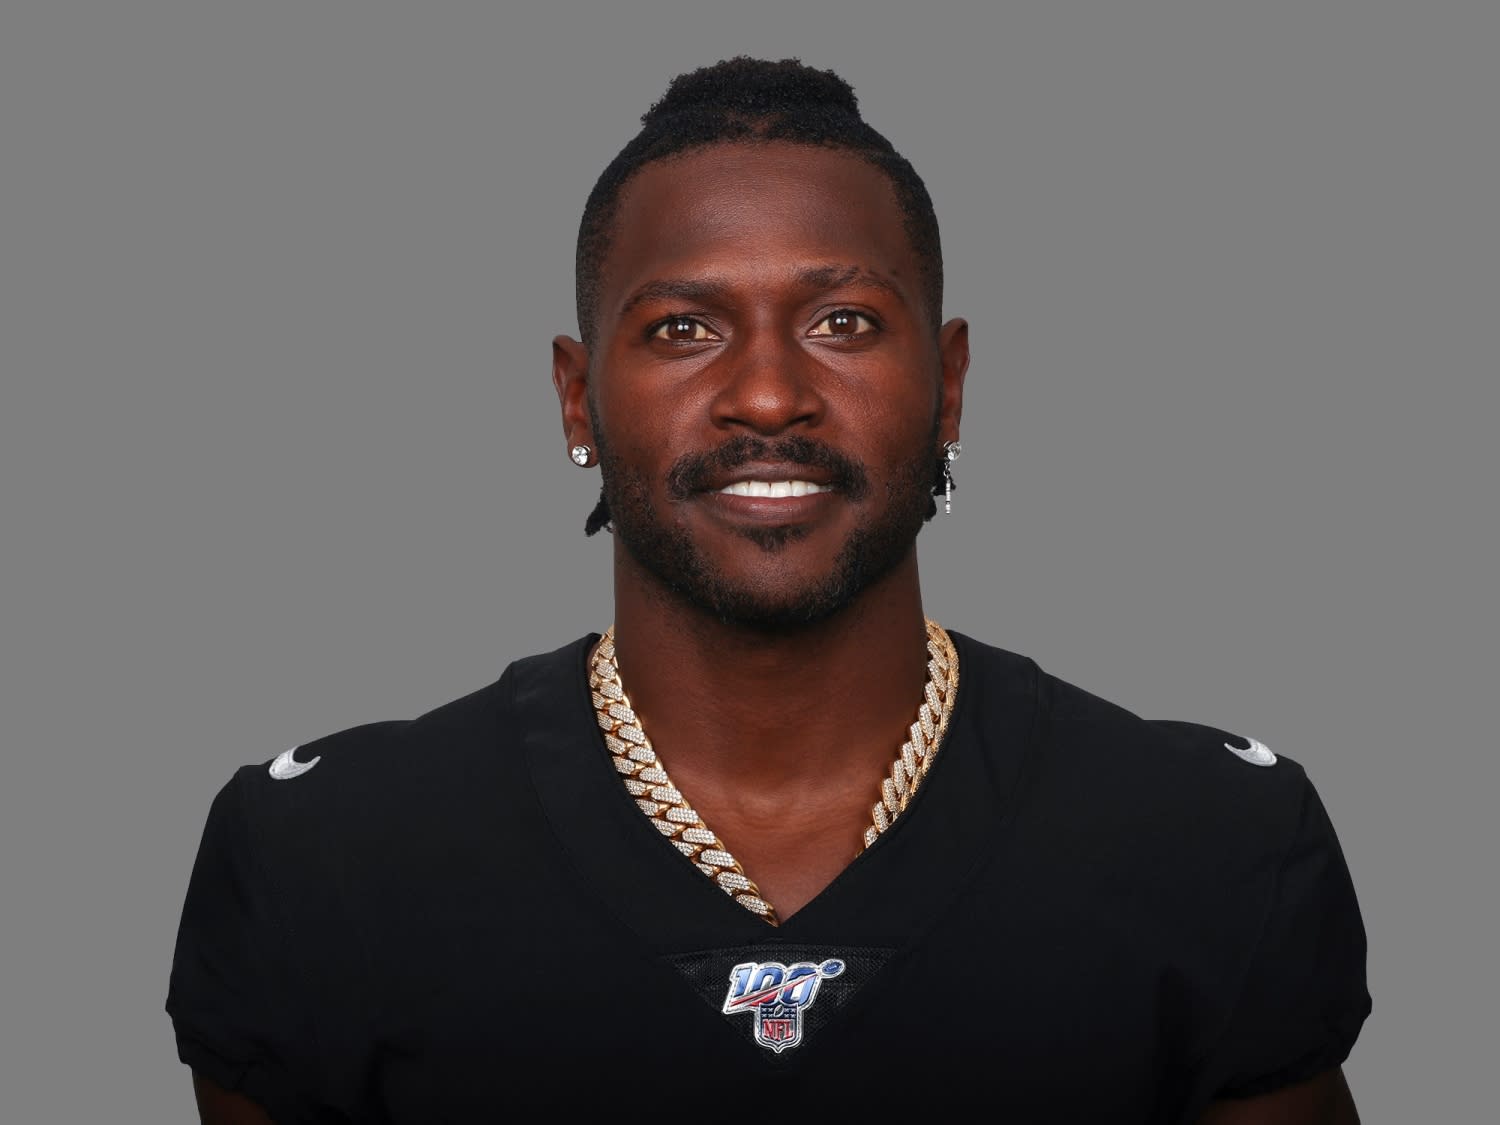 Antonio Brown's agent says all allegations are false